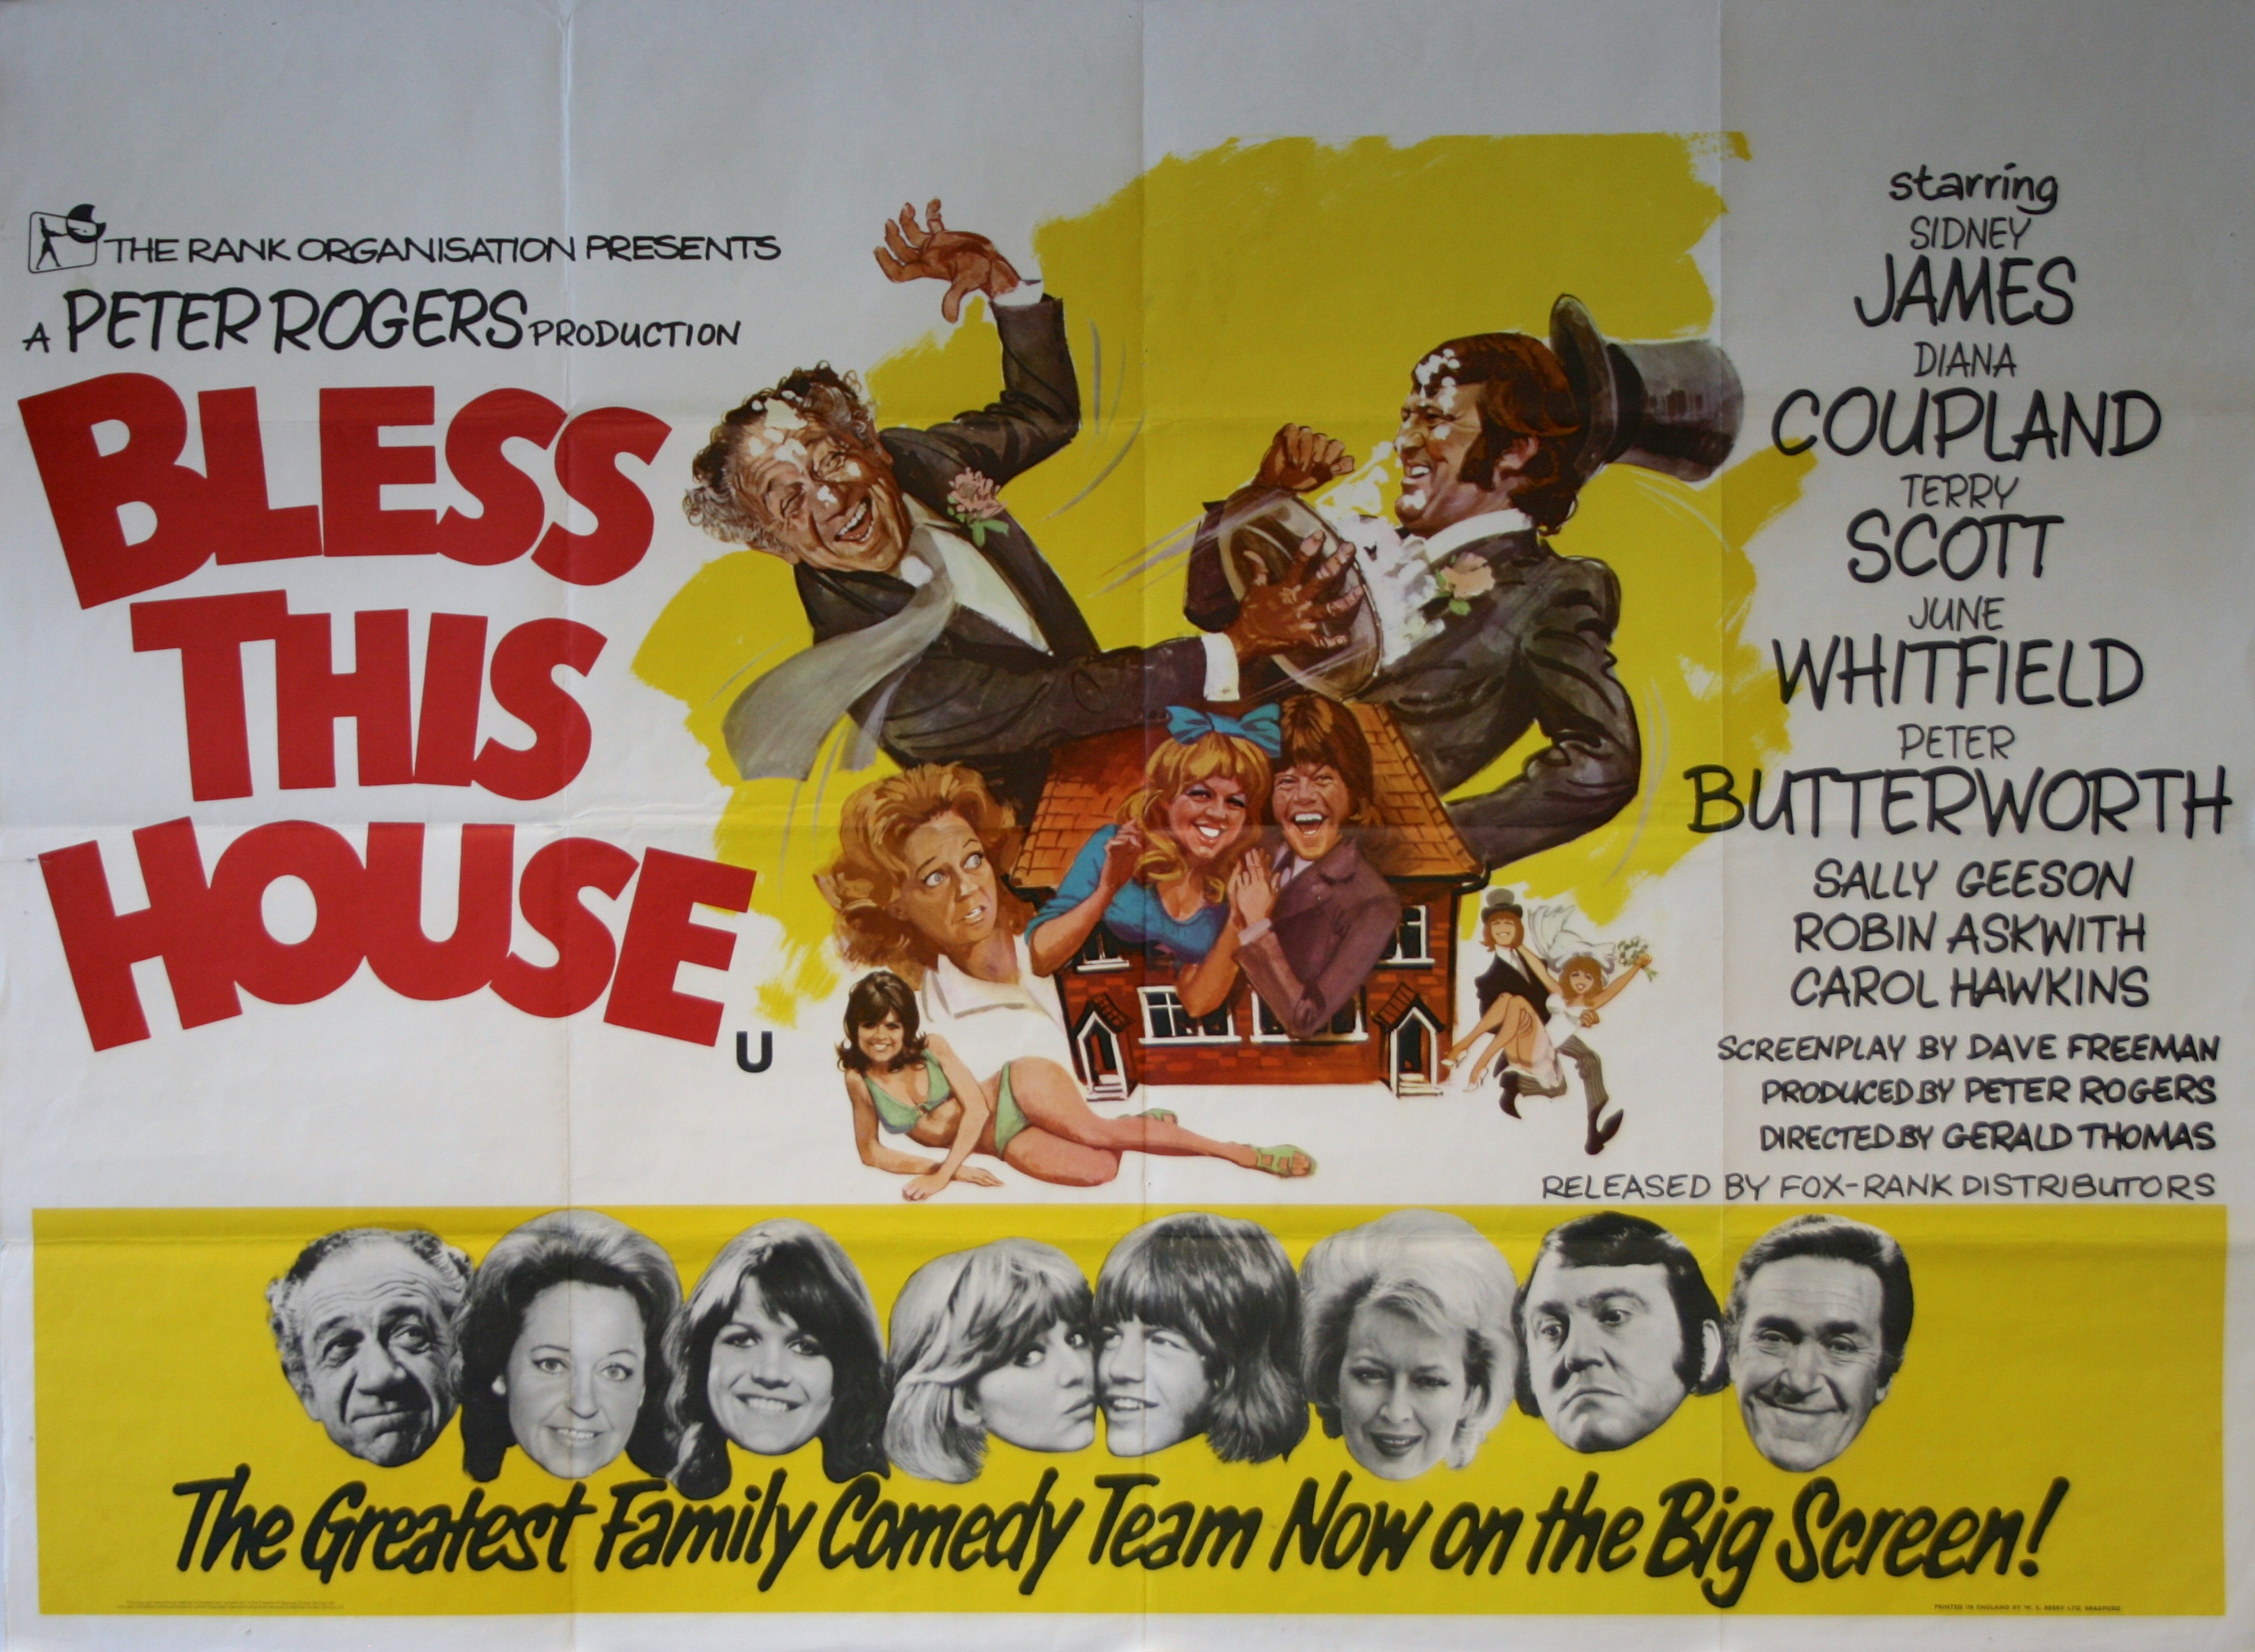 Original Bless This House Movie Poster - Sid James - Diana Coupland